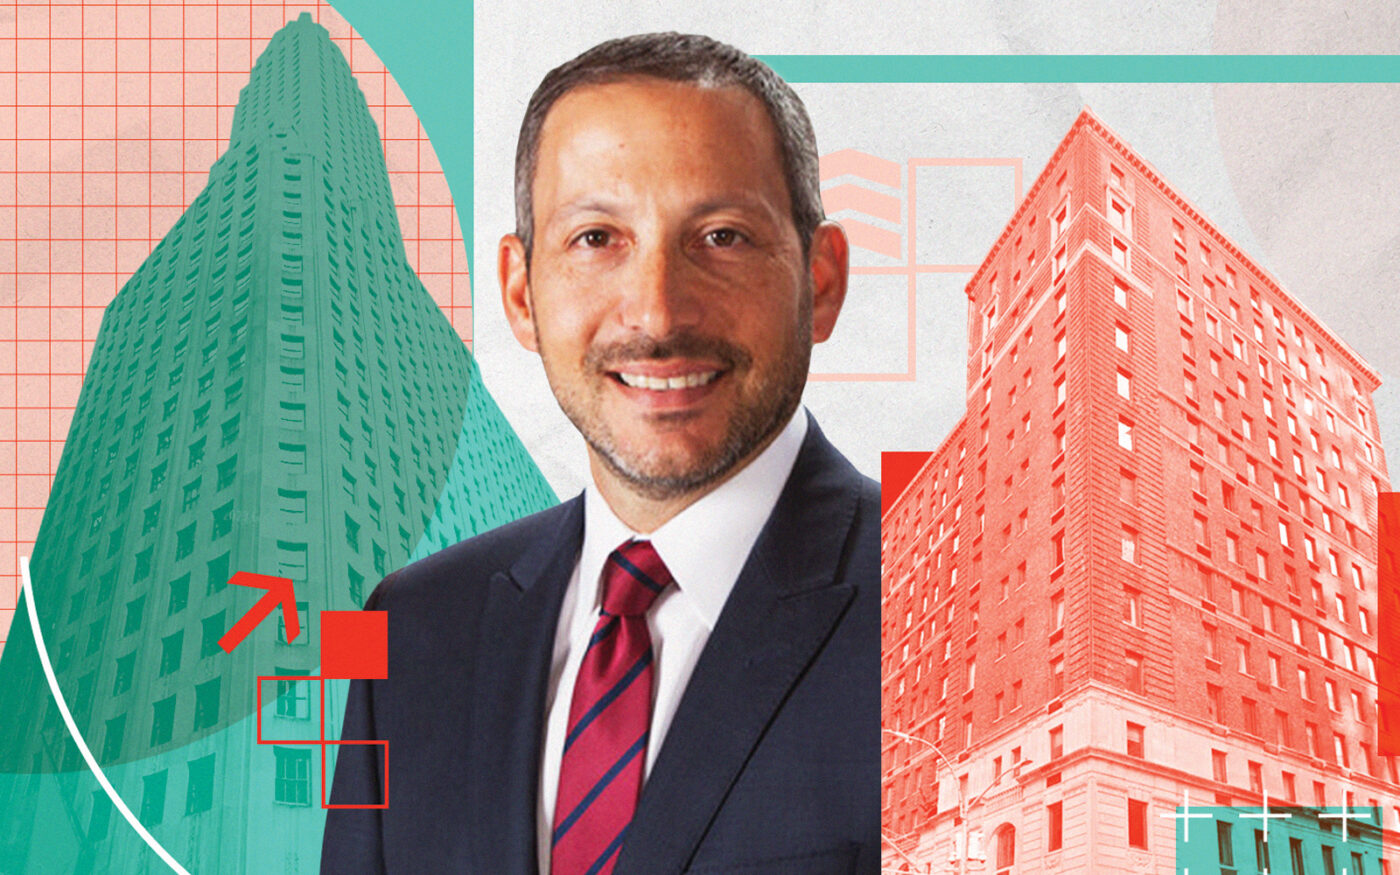 FirstService Residential’s Marc Kotler with One Wall Street and 111 West 56th Street (Photo-illustration by Ilya Hourie/The Real Deal; FirstService Residential, Google maps, Getty Images)